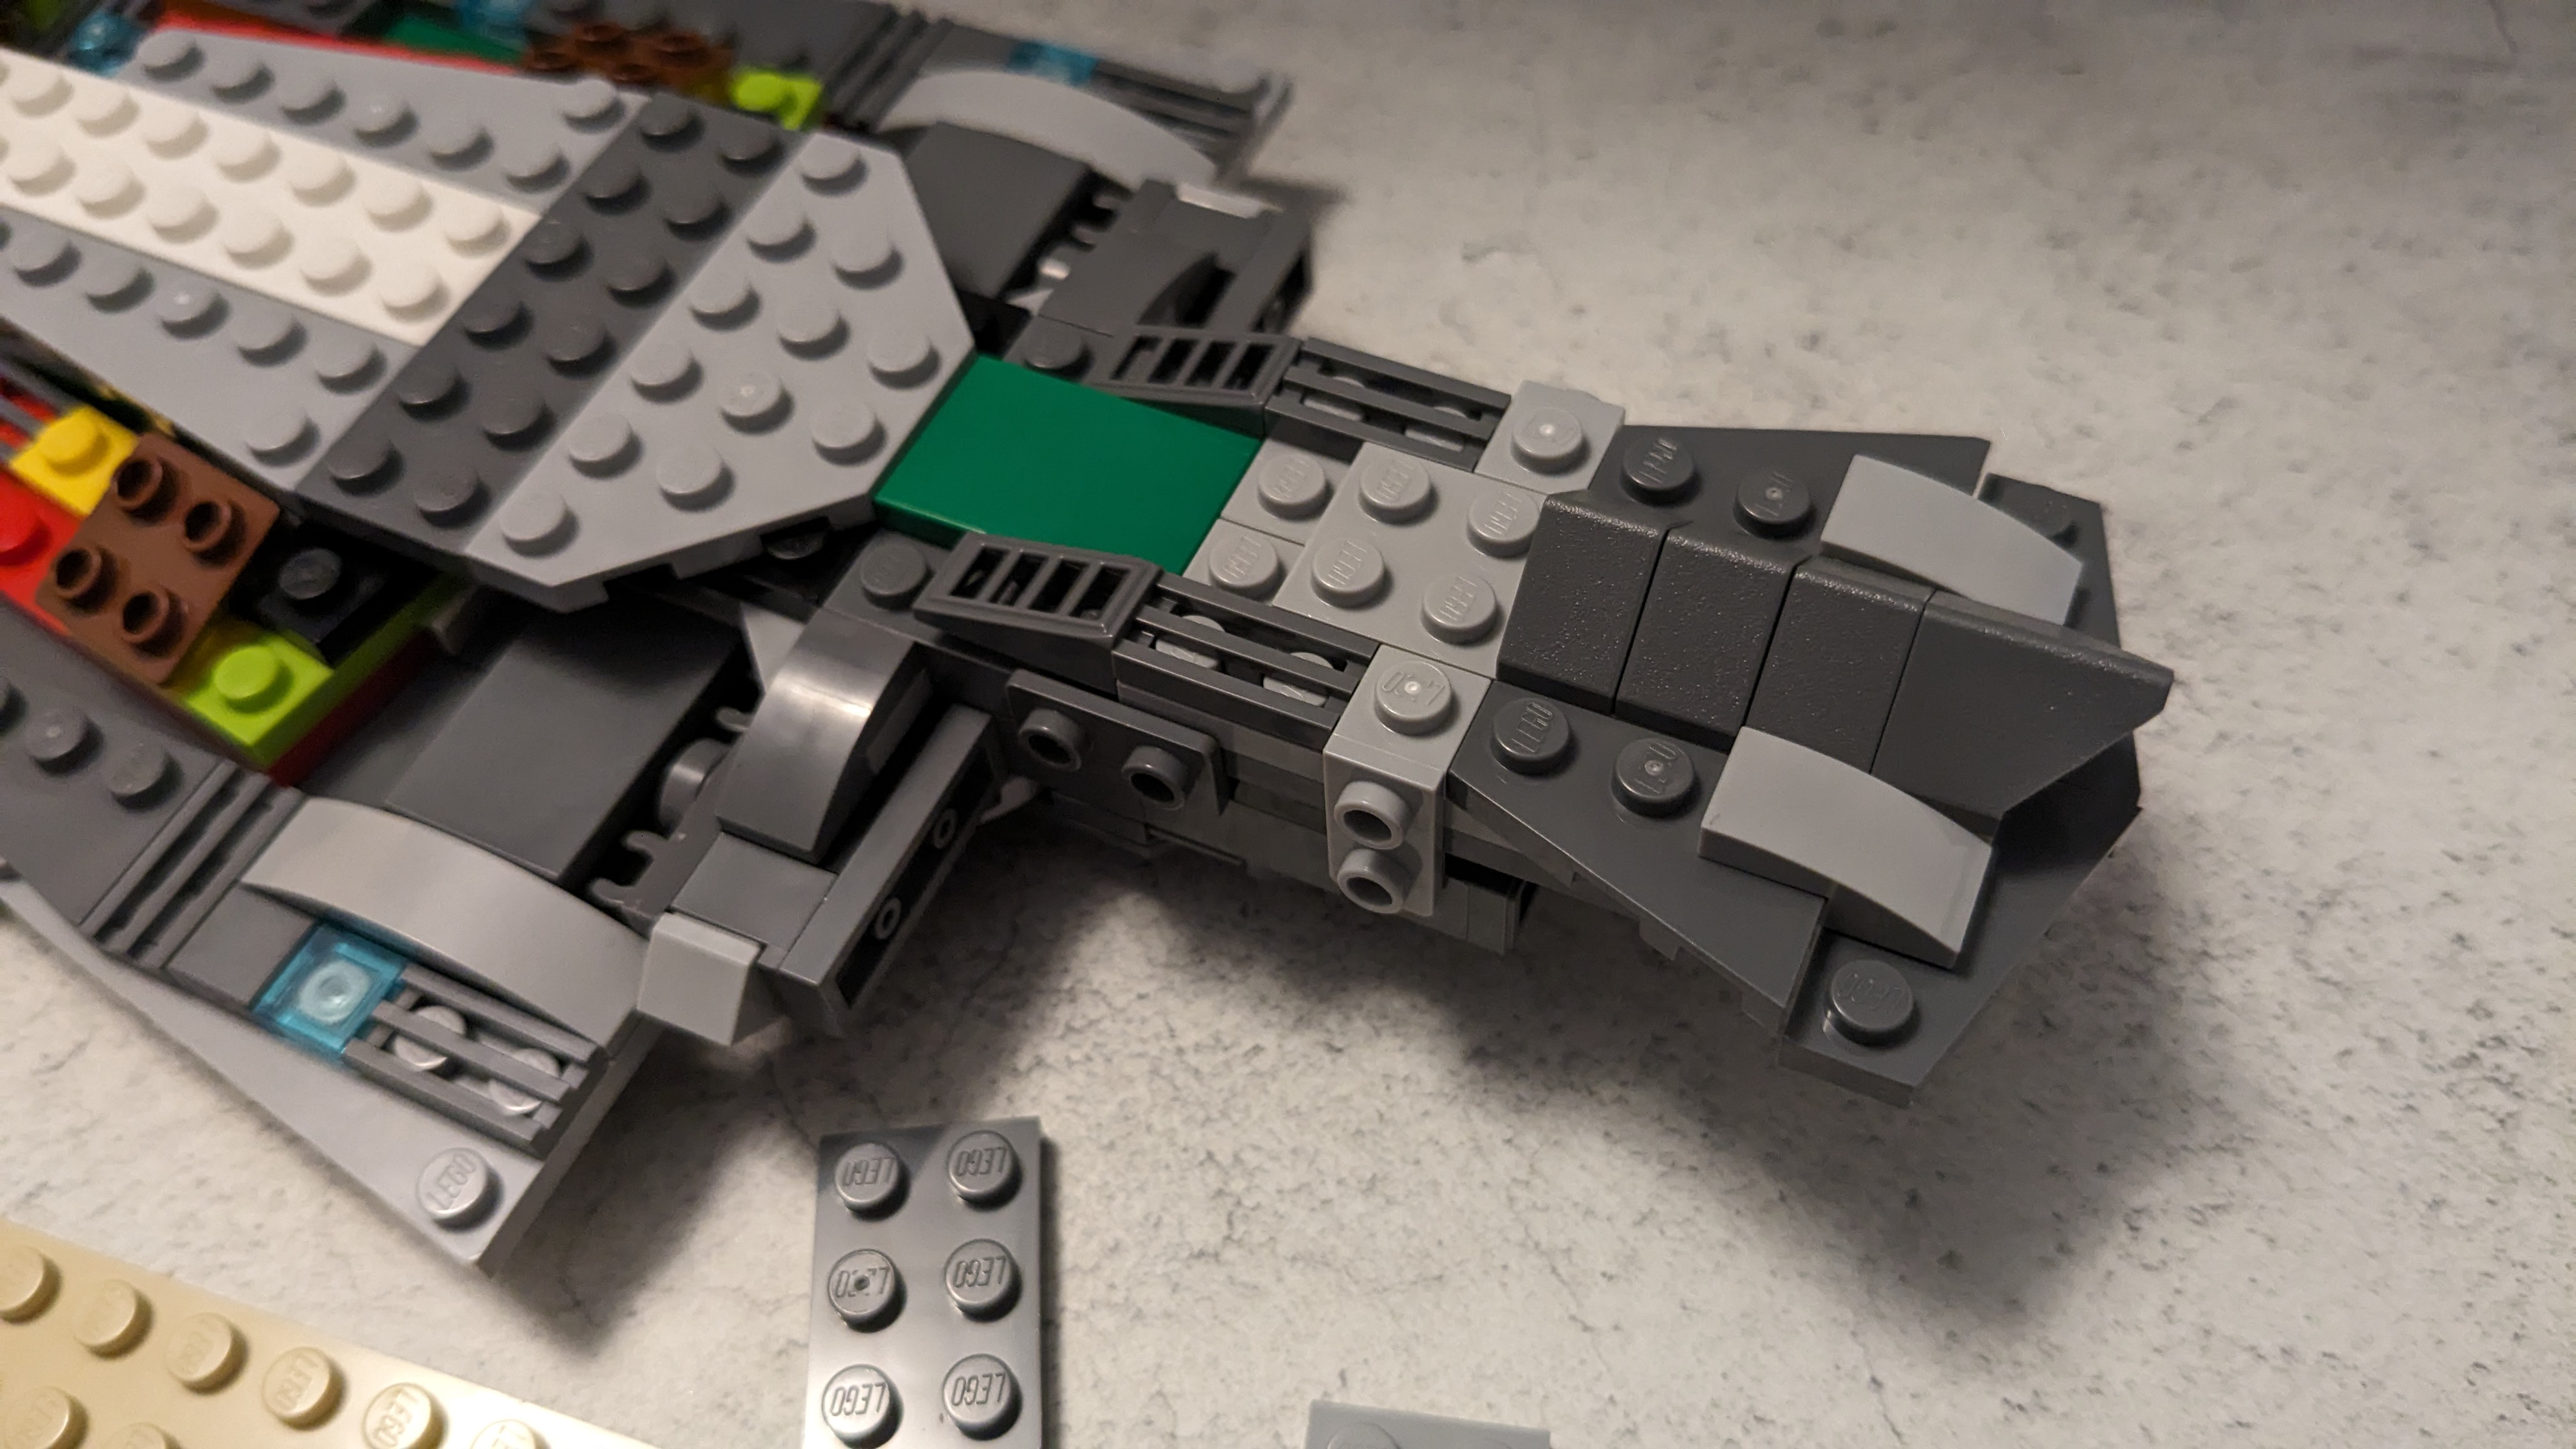 The Lego Star Wars Executor Super Star Destroyer in the process of being built.